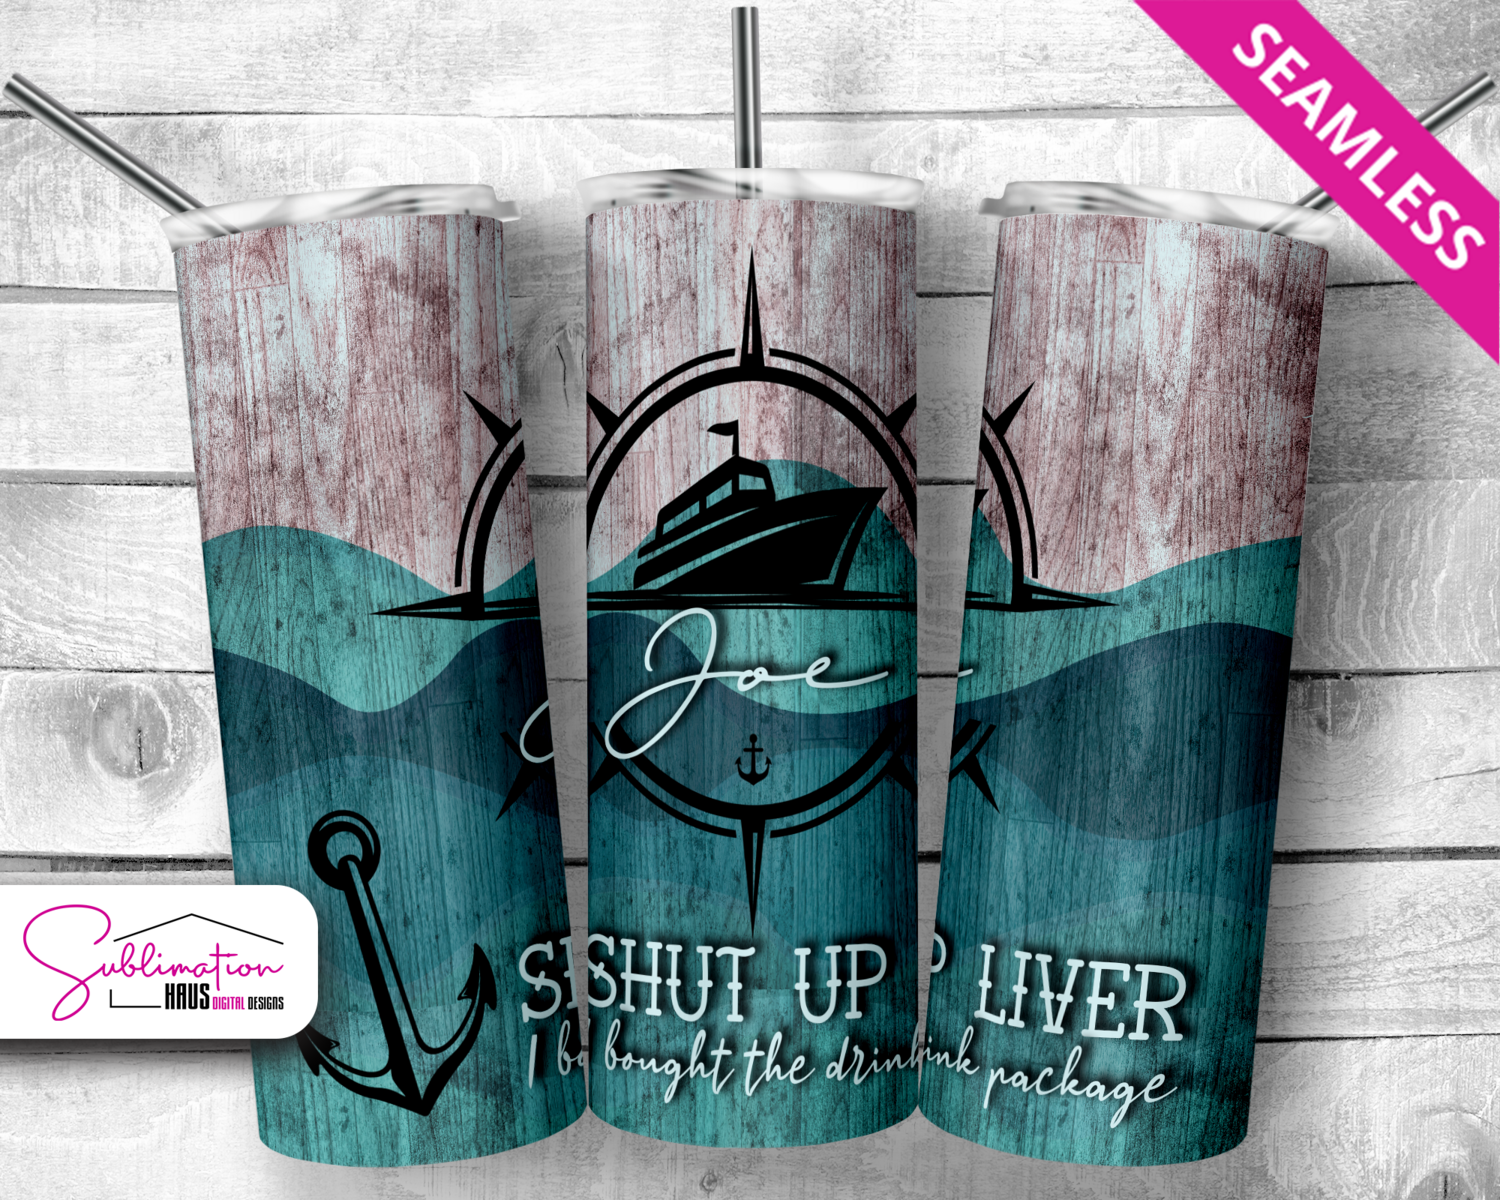 Shup up Live Cruise Ship Teal